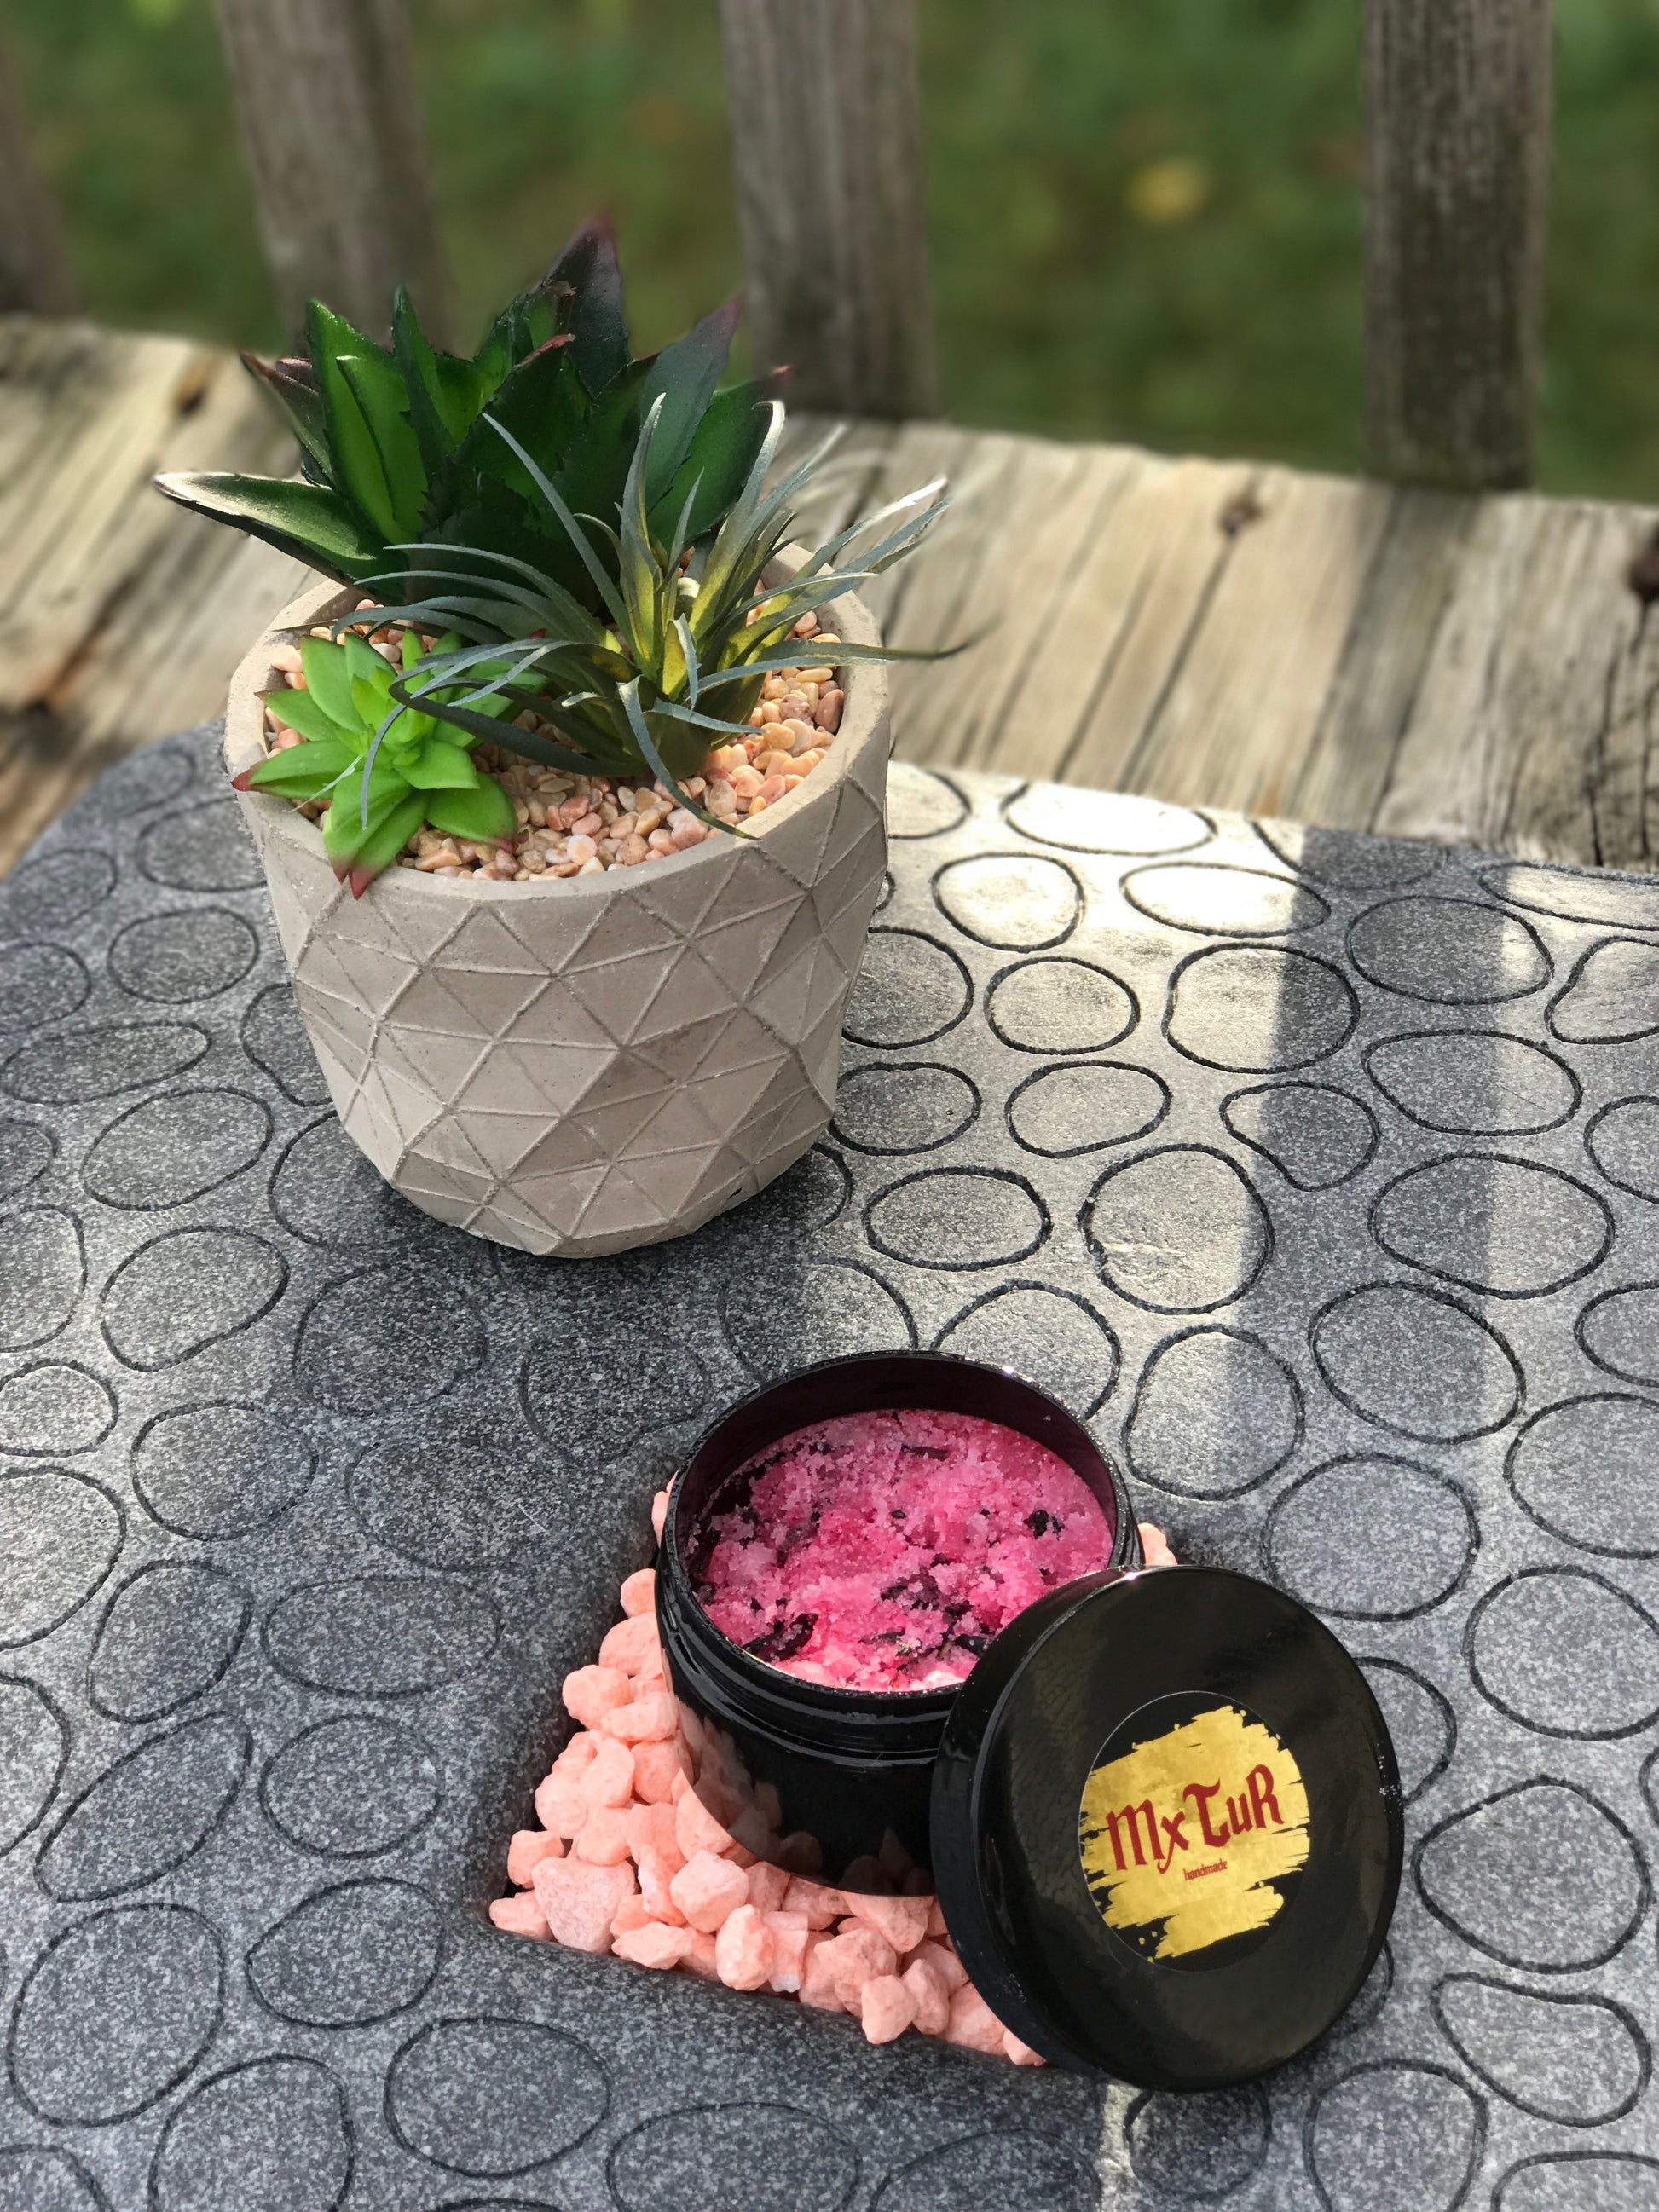 Hibiscus Face & Body Scrub -Mixtur,  Hibiscus Face & Body Scrub Mxtur, Face & Body Scrub Masks, Scrubs, Soaps, Hibiscus Face & Body Scrub skincare, Hibiscus Face & Body Scrub natural, [product_Type] Handcrafted